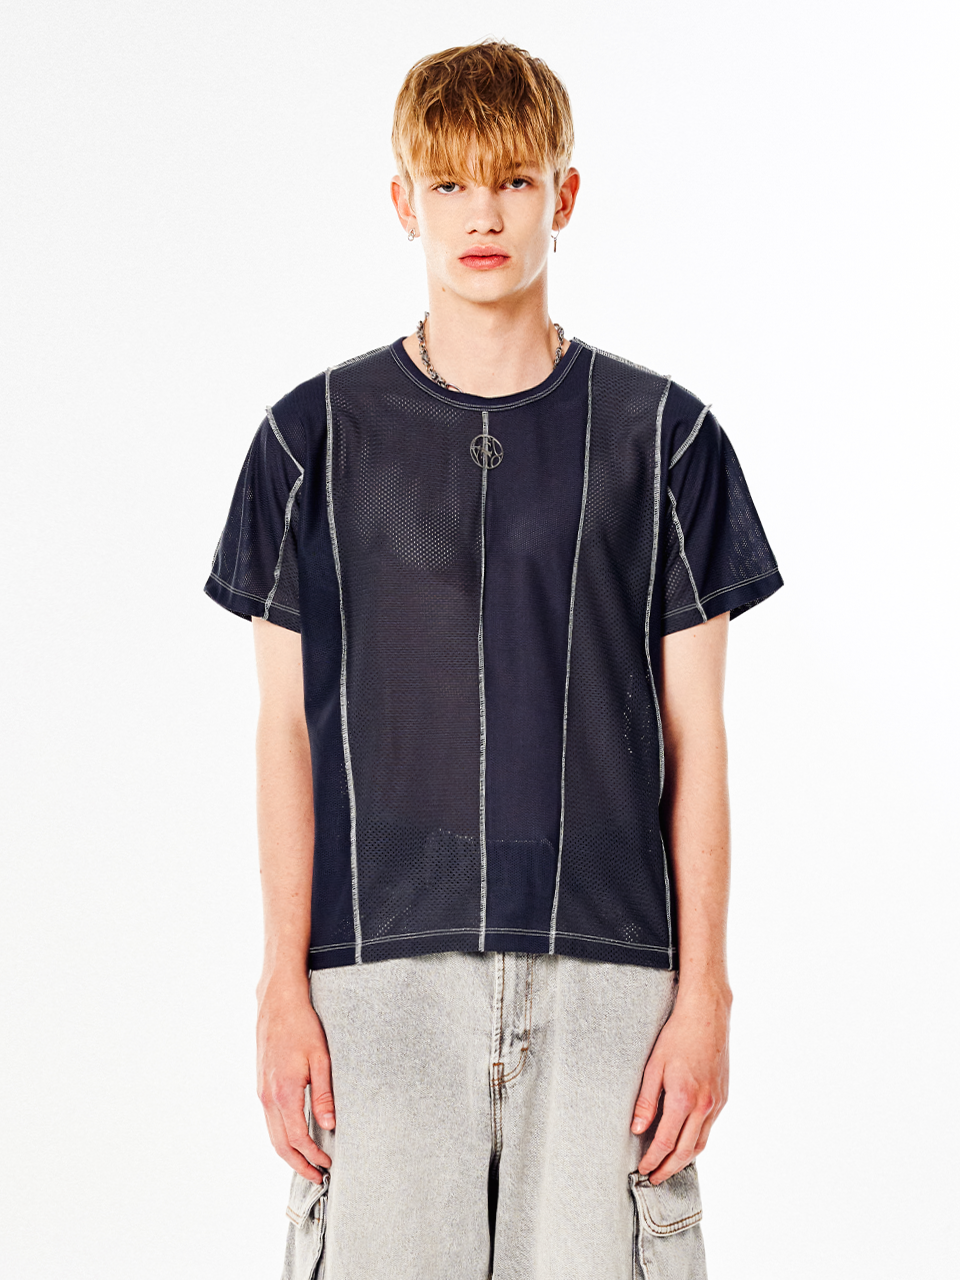 3 Mixed Patchwork T-Shirt - Charcoal